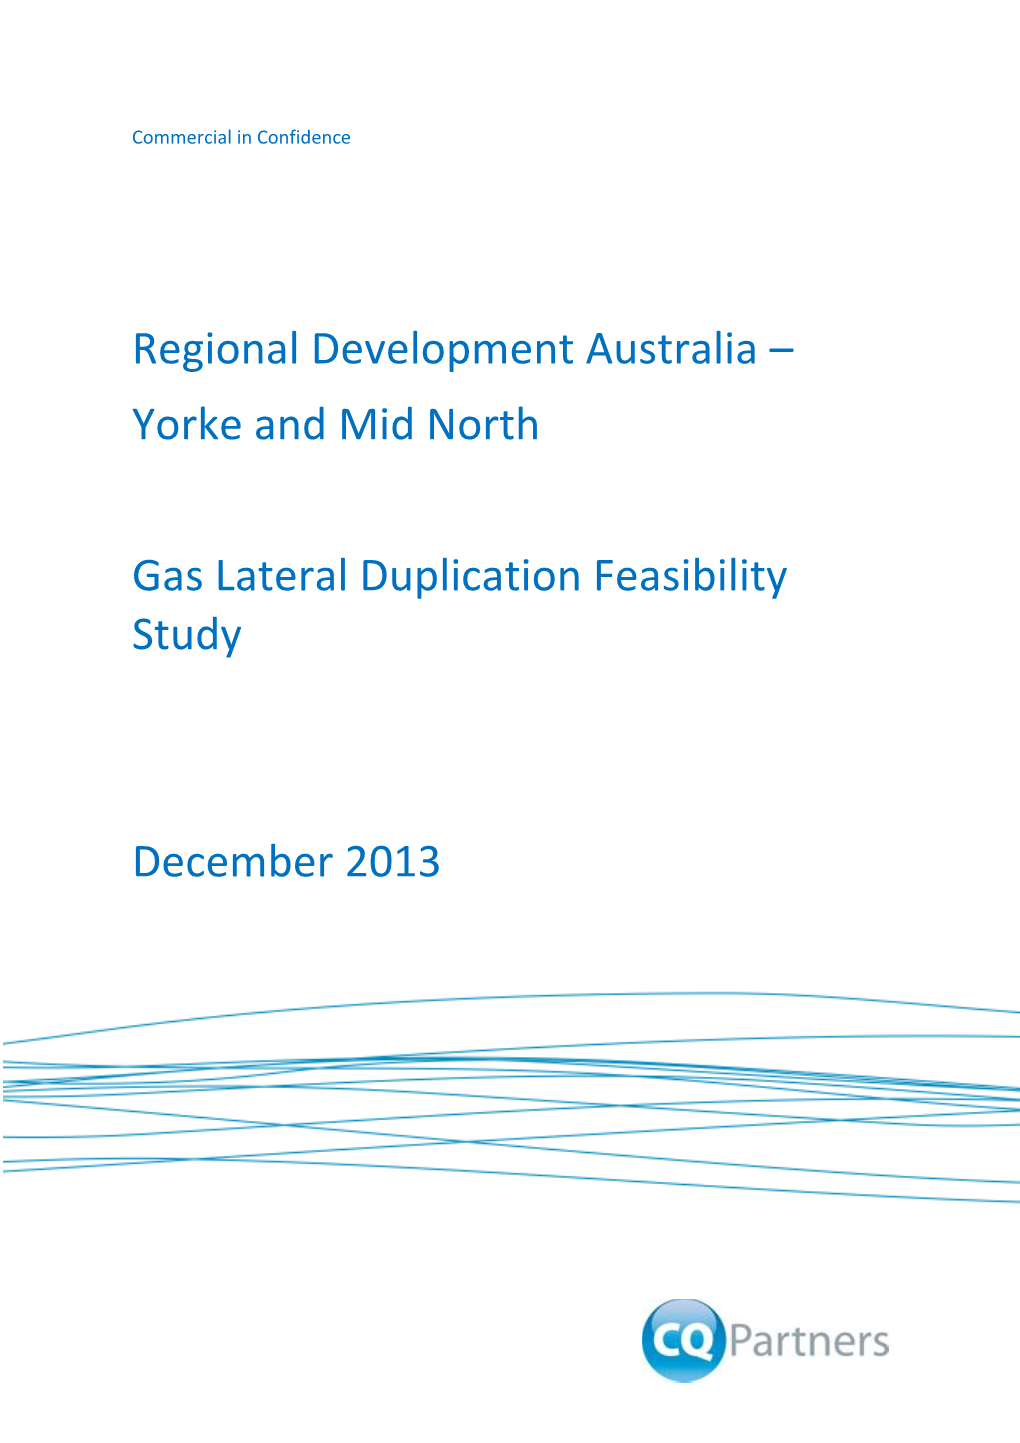 Yorke and Mid North Gas Lateral Duplication Feasibility Study